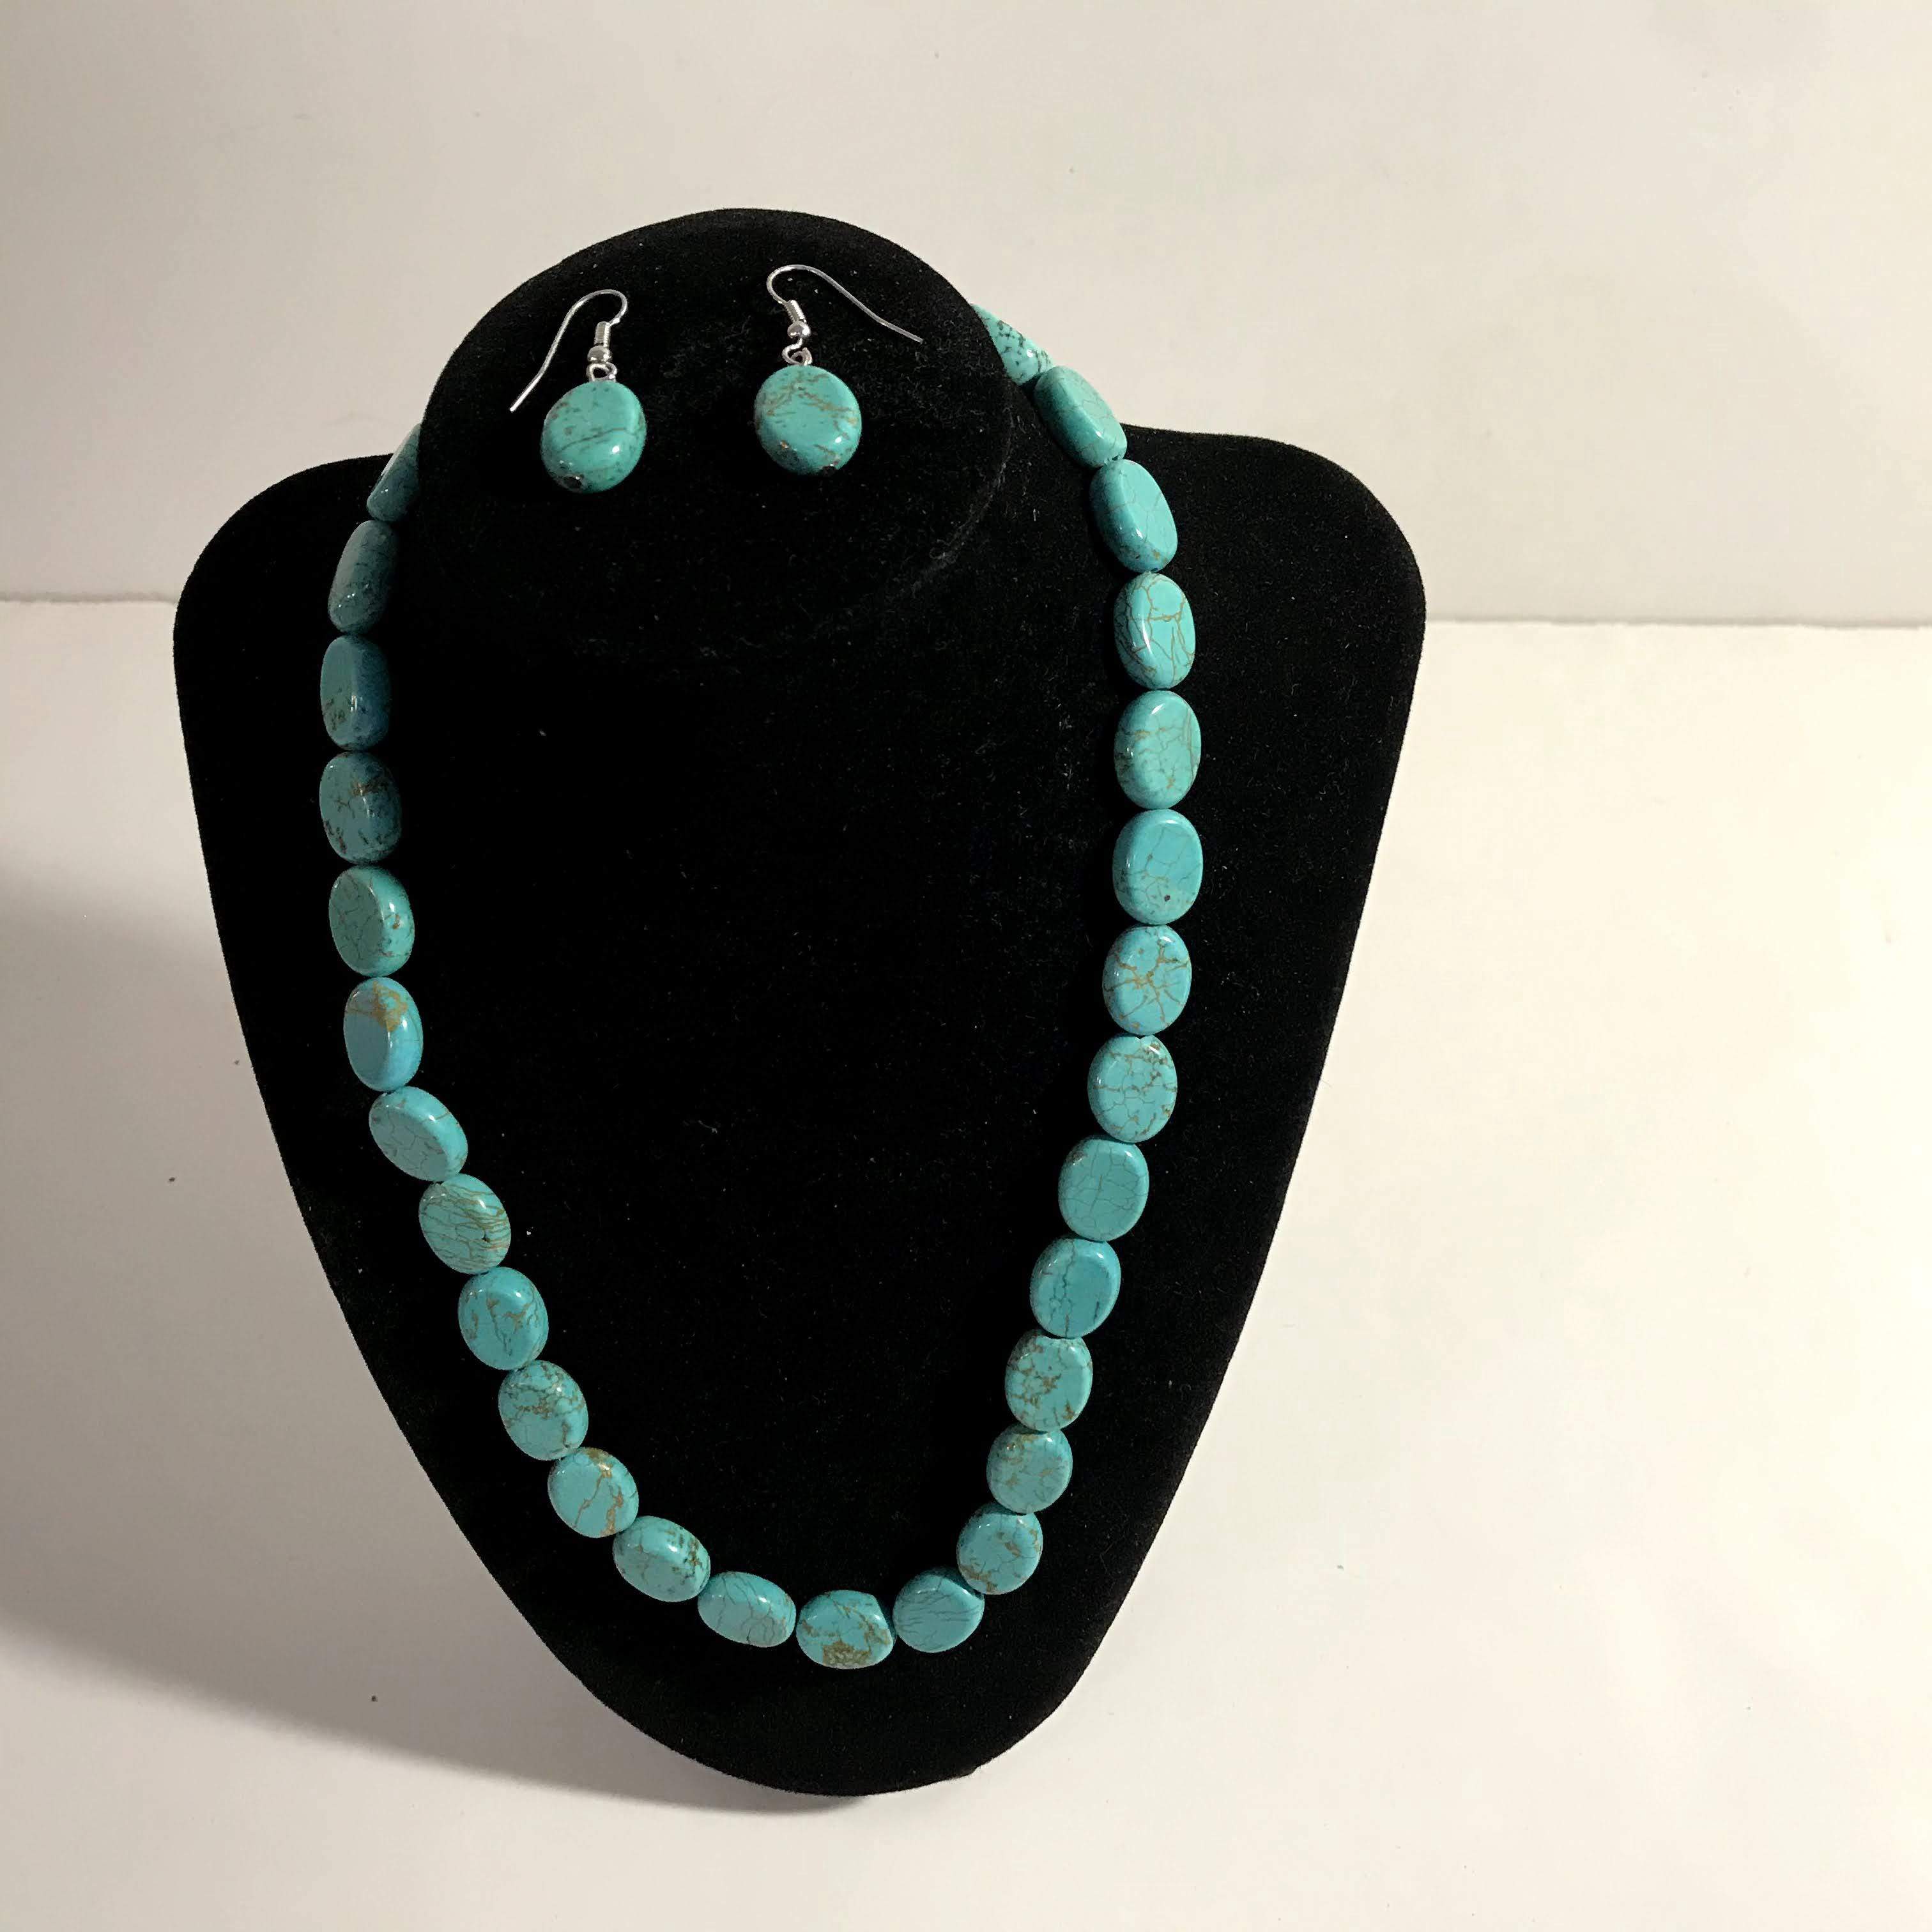 American West Blue Turquoise Round Stone Necklace w/ Matching Earrings - Shop Thrifty Treasures